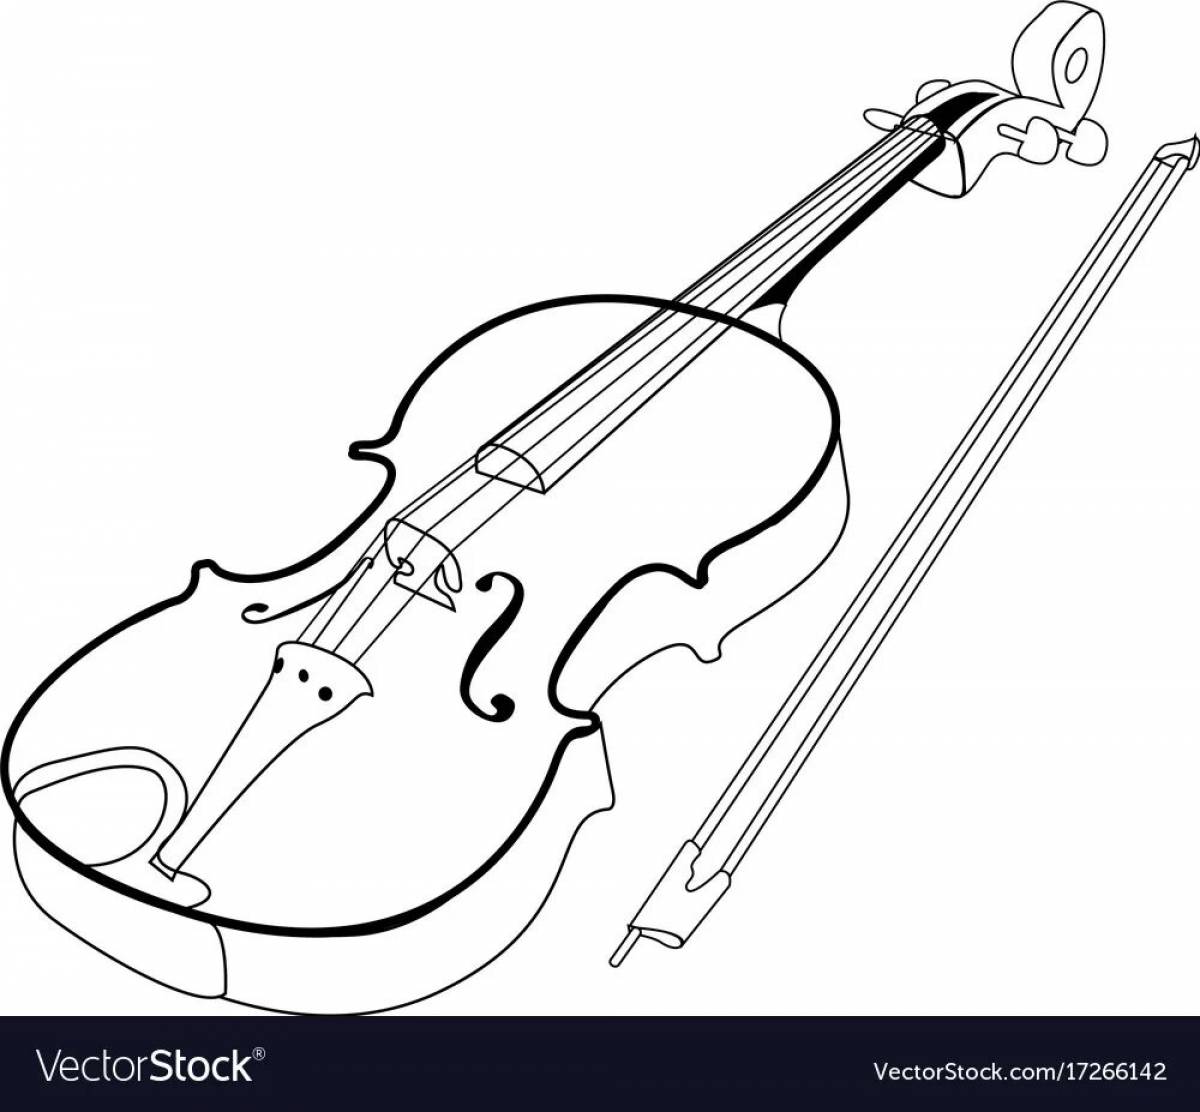 Amazing student violin coloring page